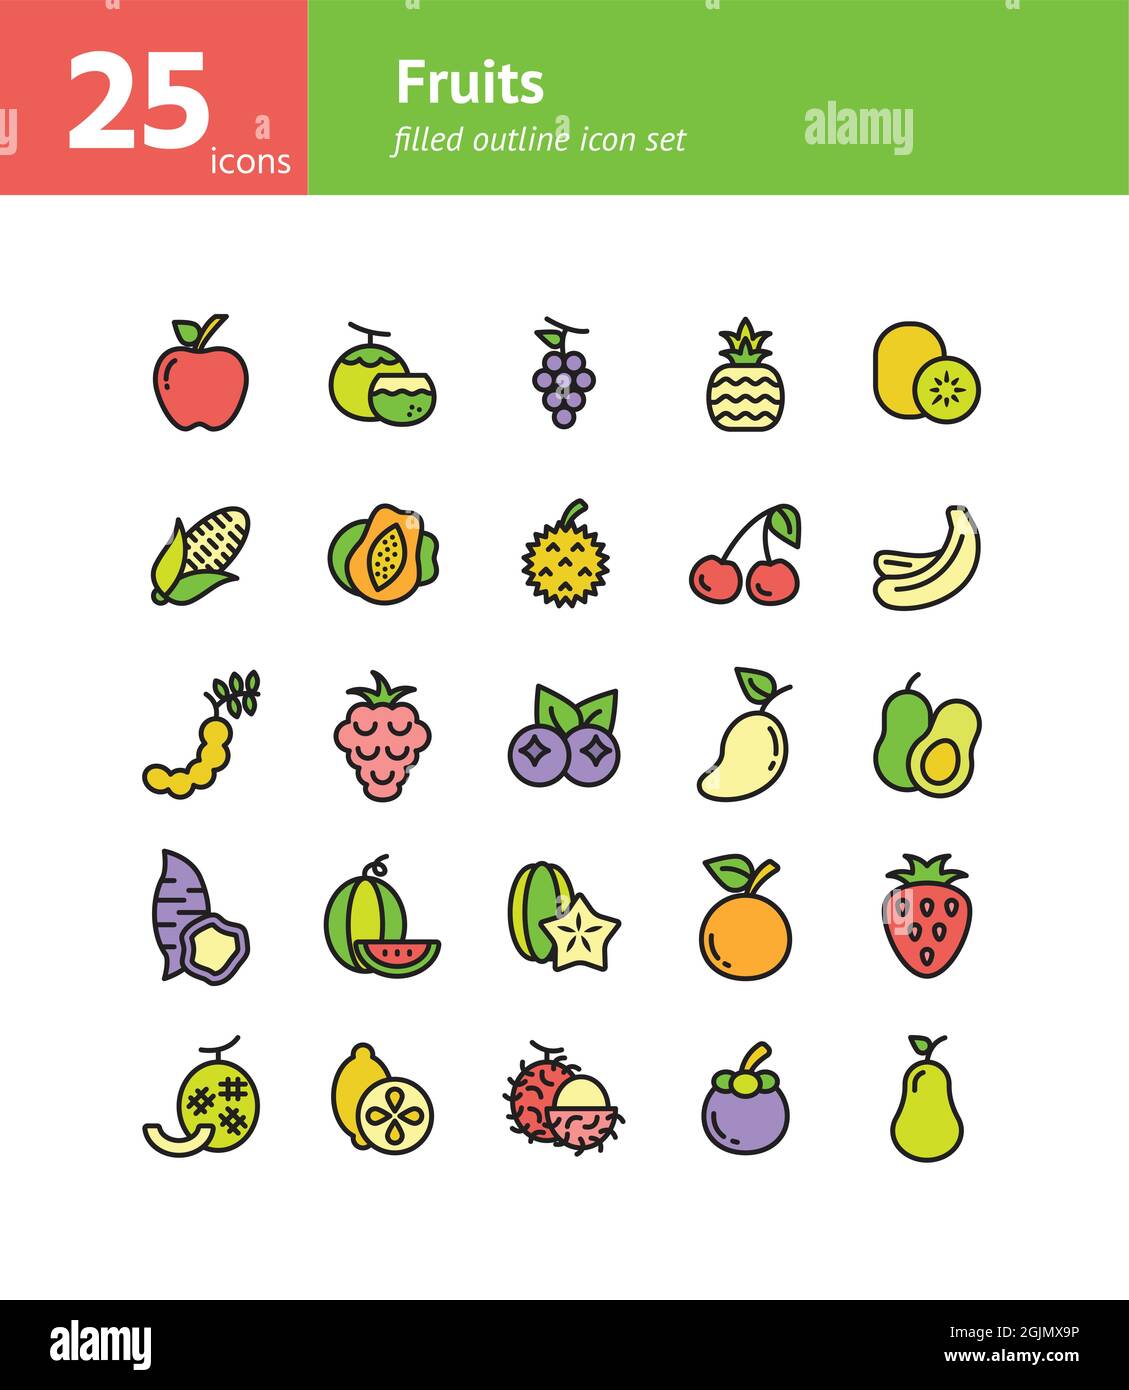 Fruits filled outline icon set. Vector and Illustration. Stock Vector